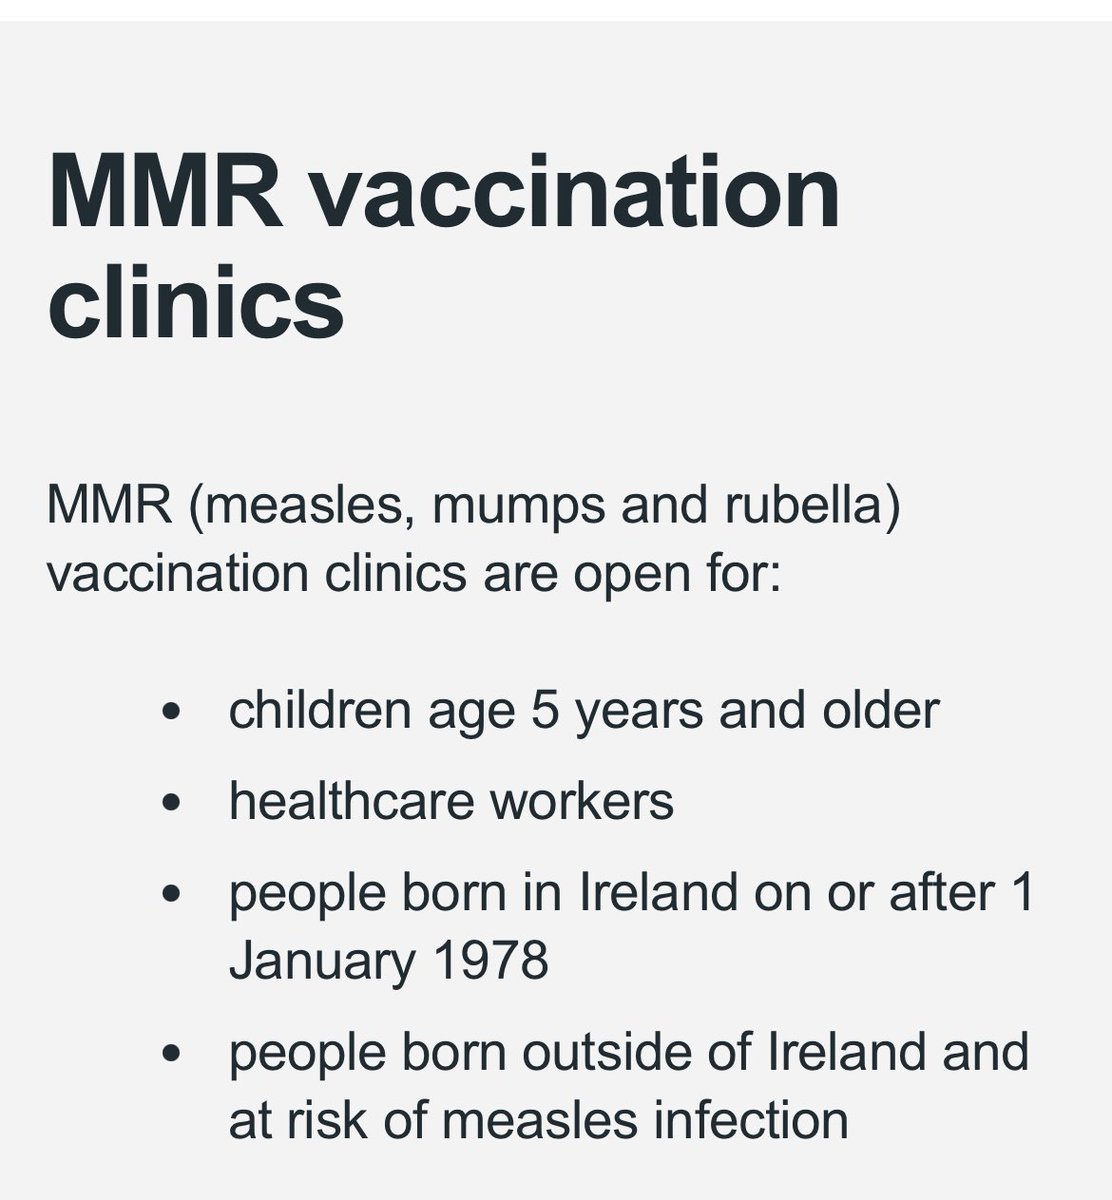 I think a really under-celebrated and under-utilised part of our measles response is the fact that there now are free walk-in measles vaccination clinics happening all over the country each week, which were stood up urgently in response to the threat of measles. Please share…